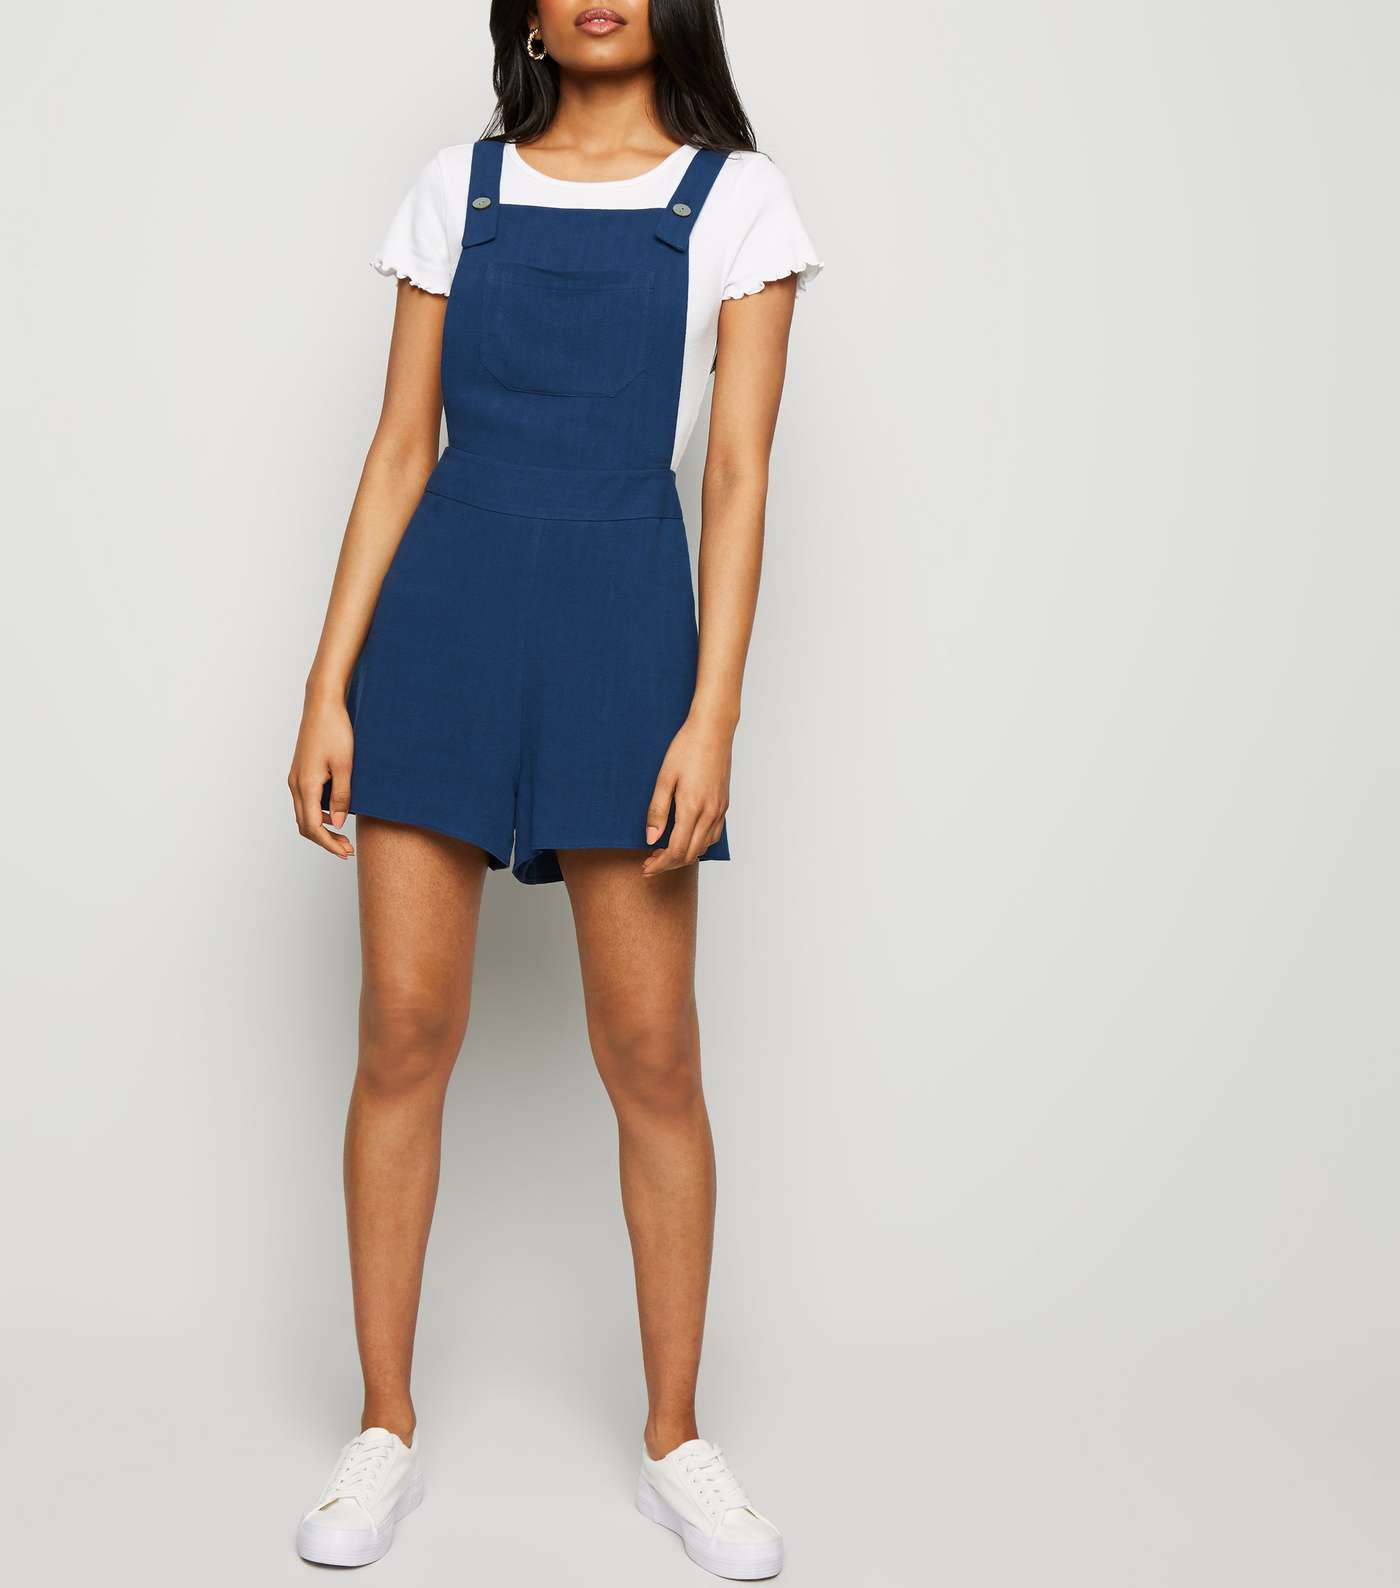 Petite Navy Linen Look Strappy Playsuit Image 2